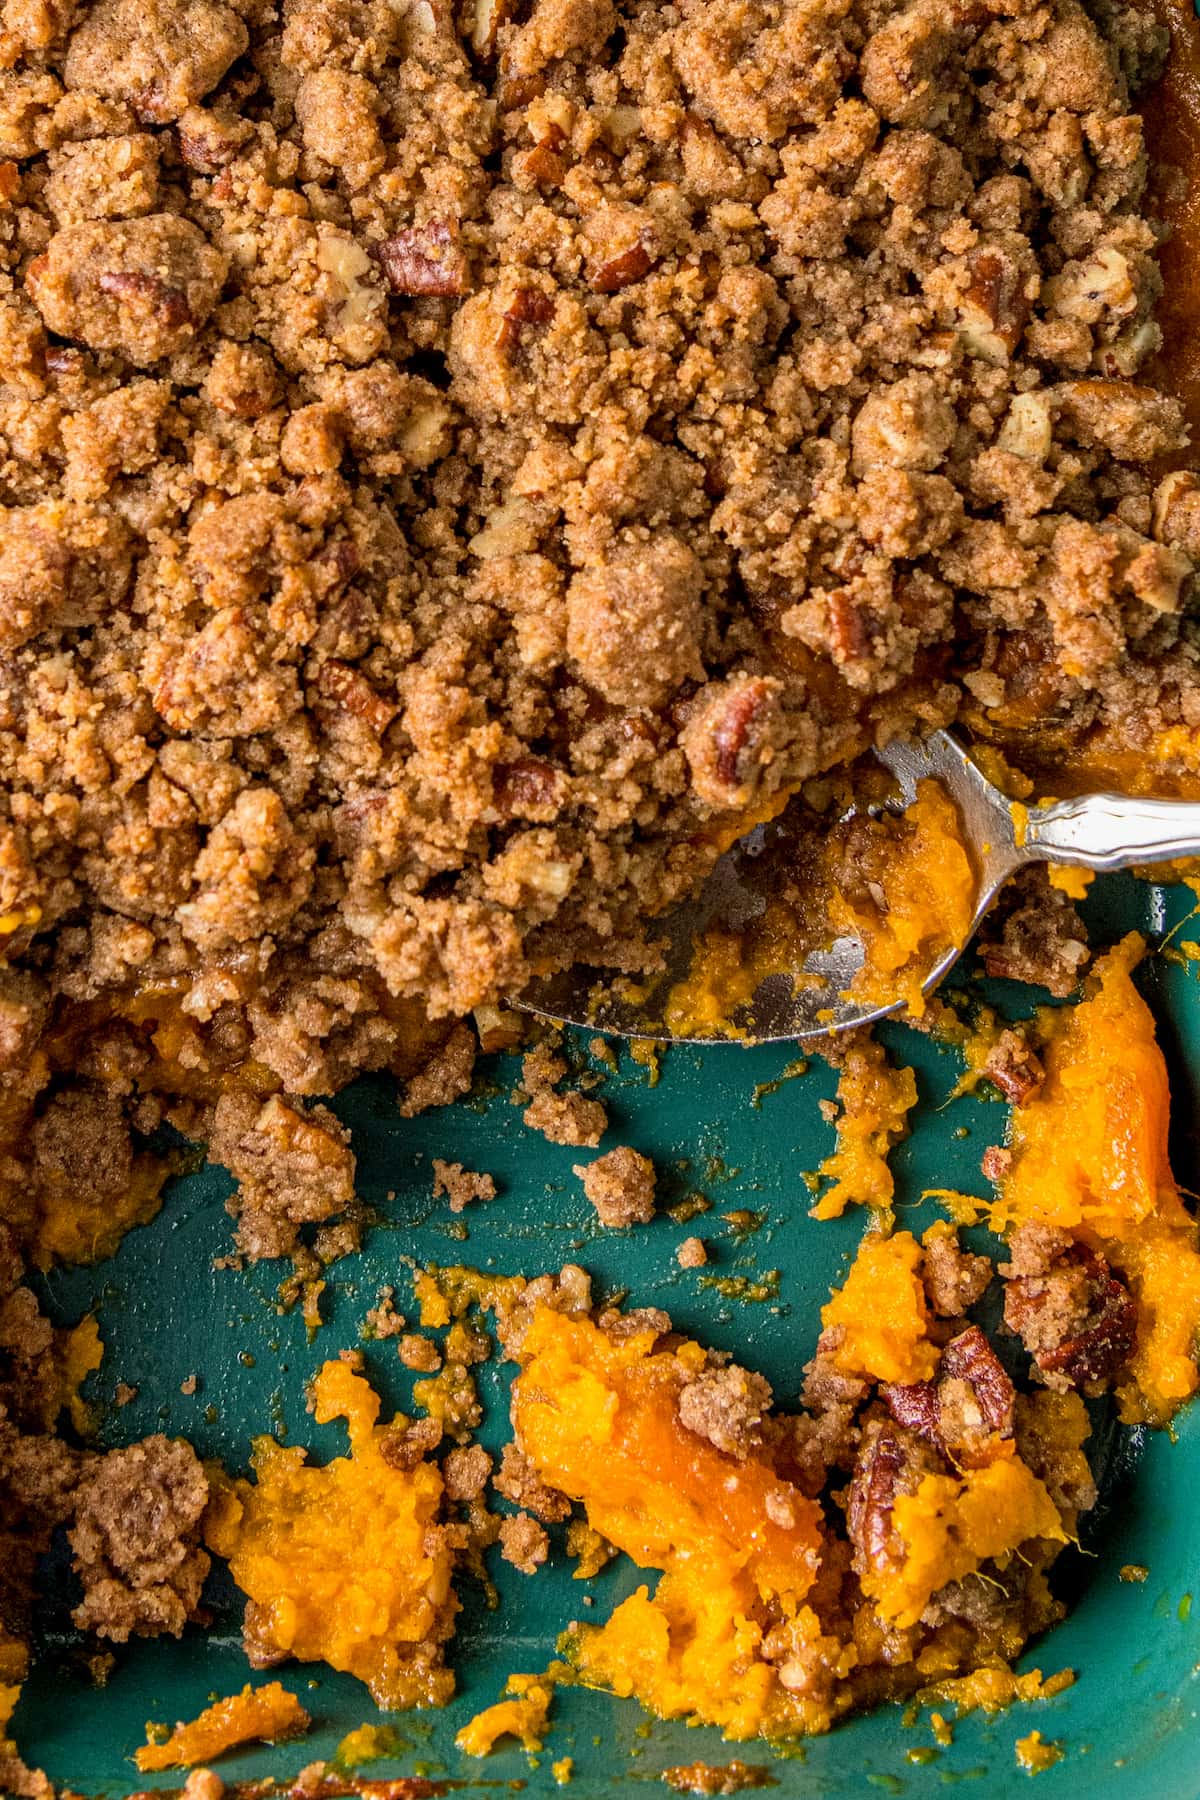 sweet potato soufflé with brown sugar and pecan topping